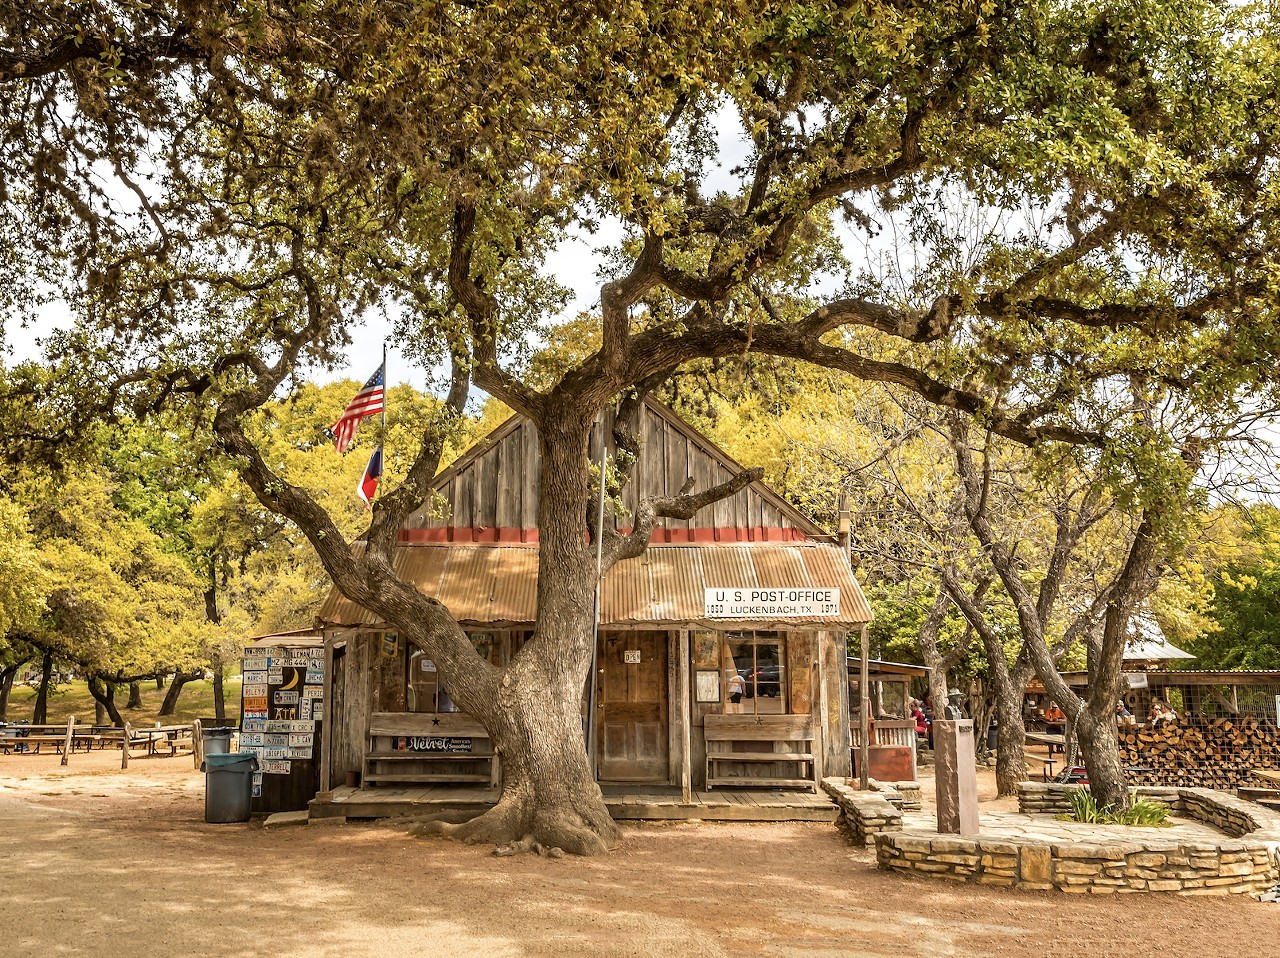 Luckenbach
About a 1 hour drive north of San Antonio
Let's go to Luckenbach, Texas — as Waylon and Willie and the boys would say. This Hill Country town near Fredericksburg, made famous by the 1977 country song of the same name, is for those looking for a quiet weekend getaway. Travelers can visit the old community trading post and two-step at the town's famous music hall or try an array of Texas wines at one of the many vineyards in the area.